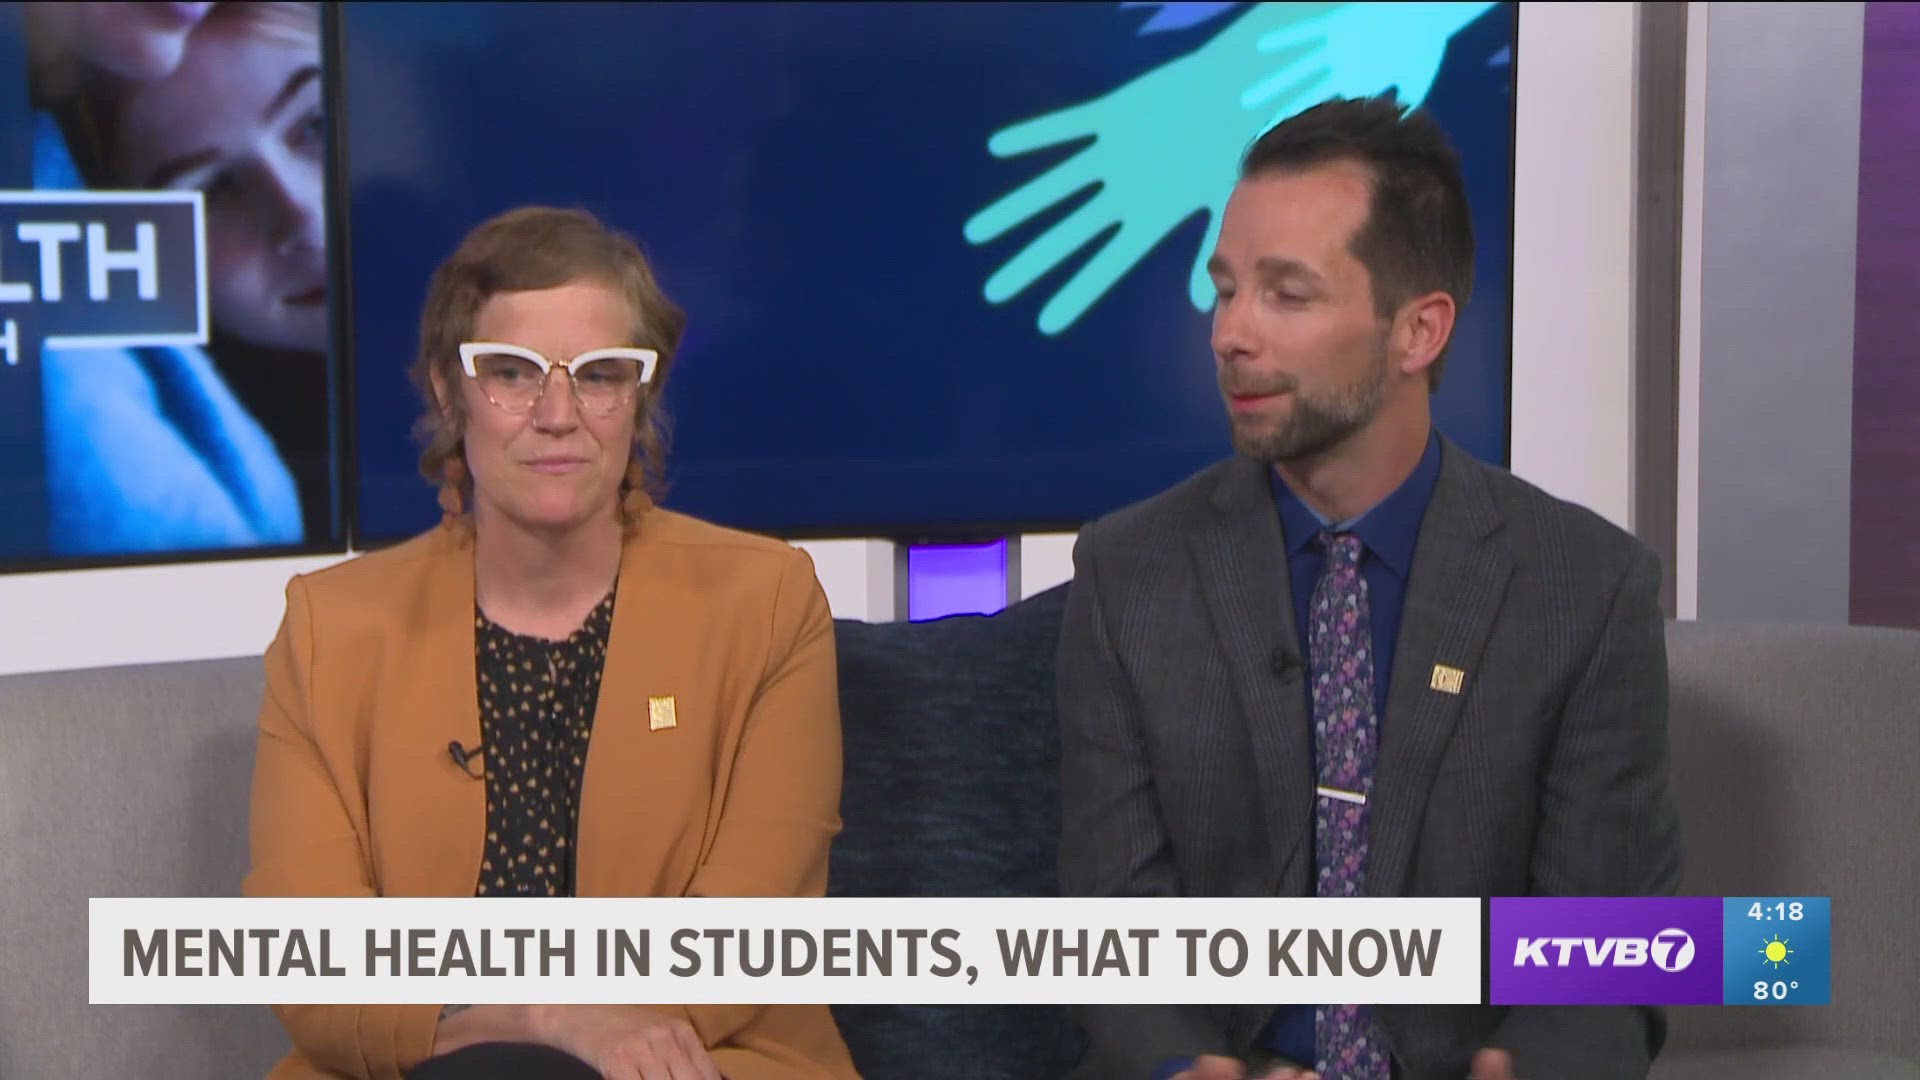 Jason Shanks and Gia Trotter with the Boise School District join KTVB to discuss what you need to know about supporting students' mental health.